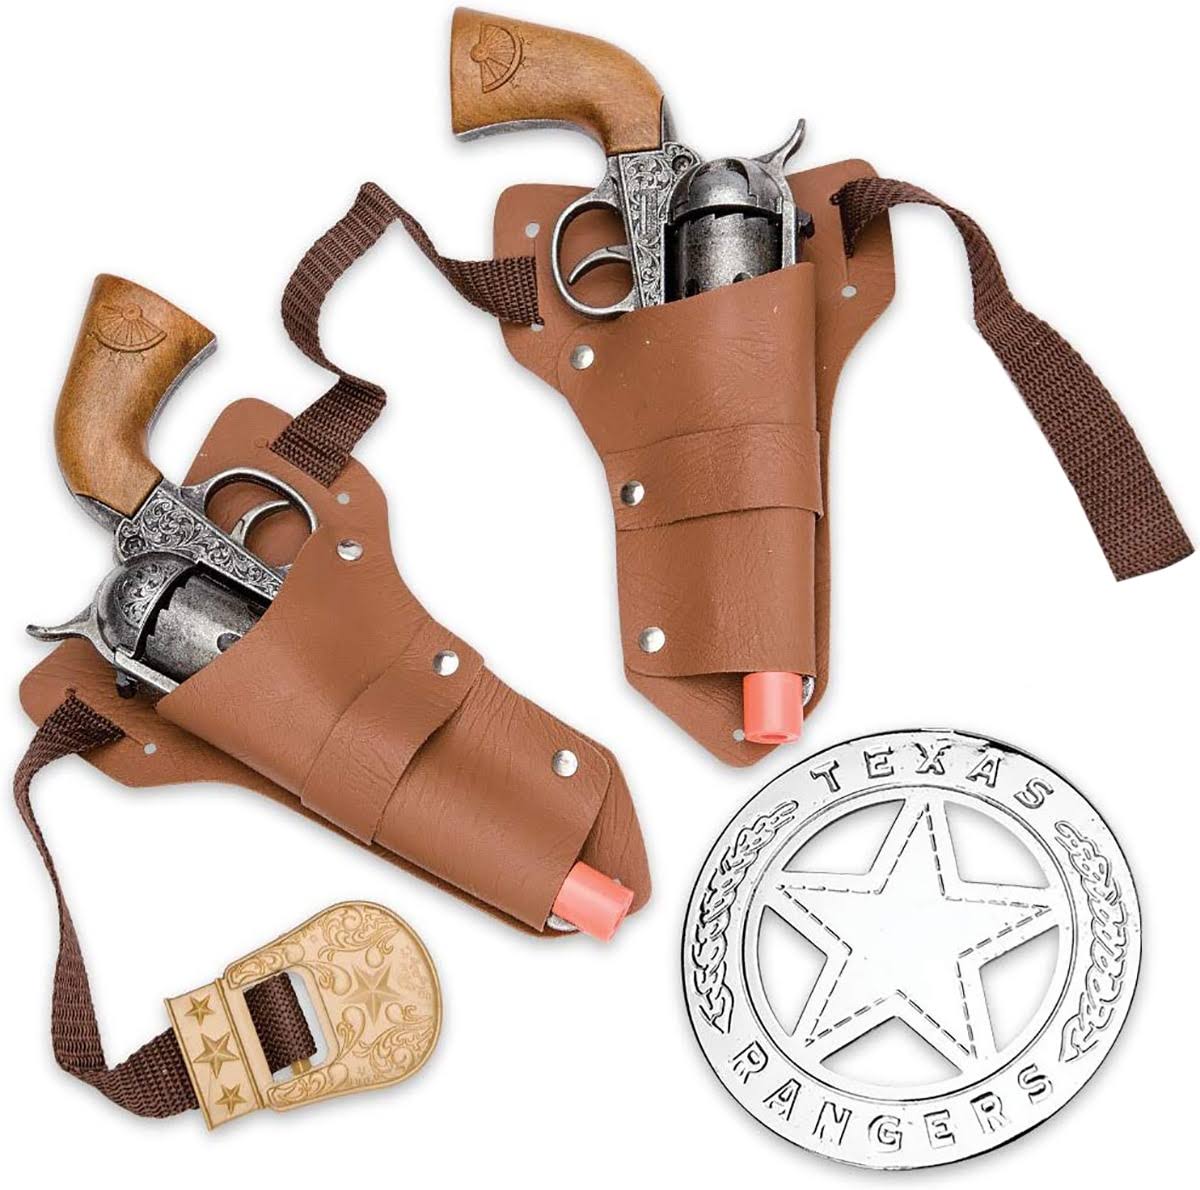 Parris Mfg. Texas Ranger Double-Holster Toy Shooter